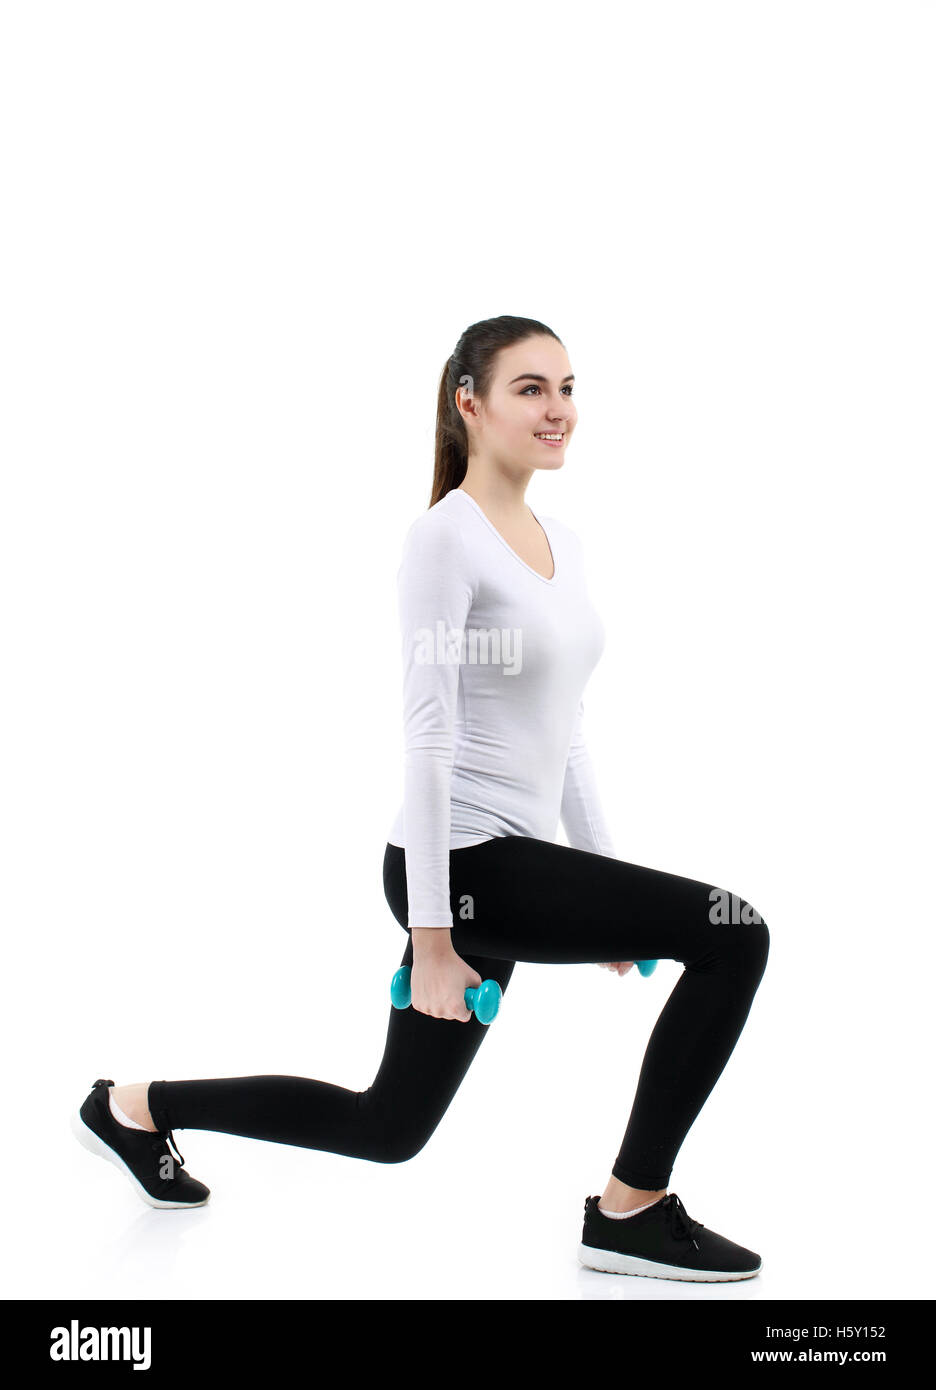 Young healthy fitness woman. Over white background Stock Photo